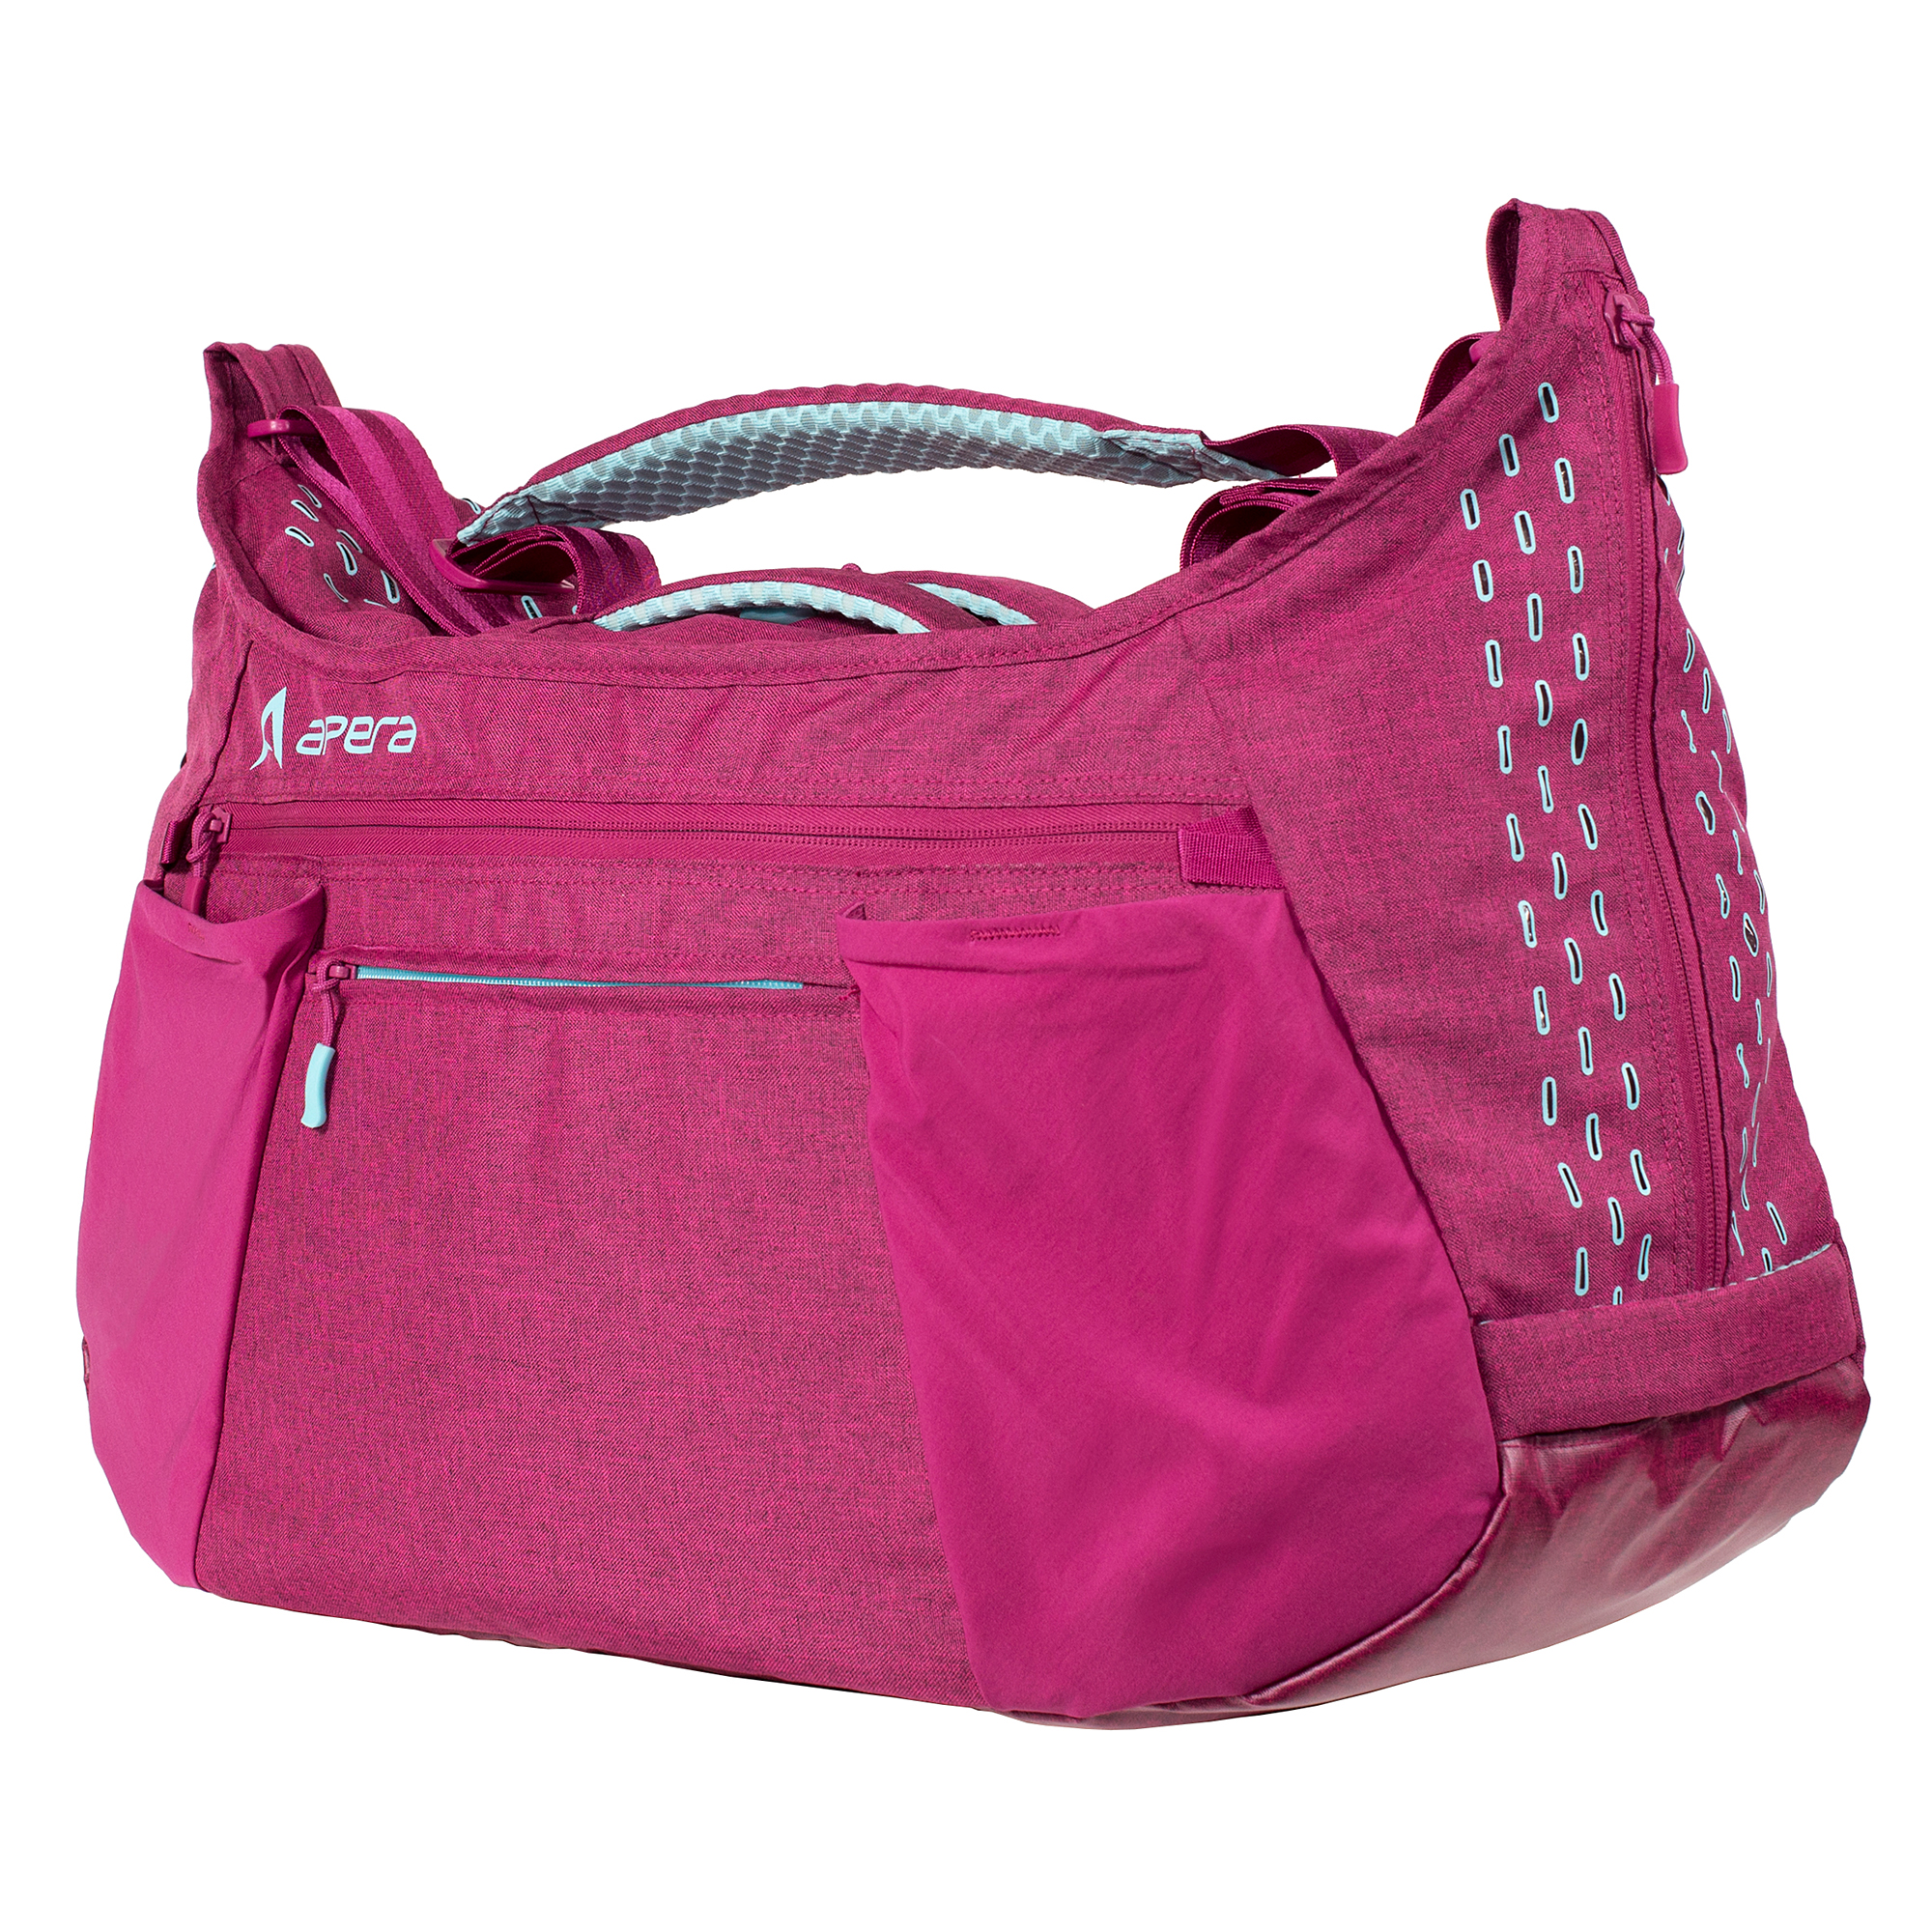 Apera Performance Duffle Powerberry/Arctic Blue Accents - image 2 of 5